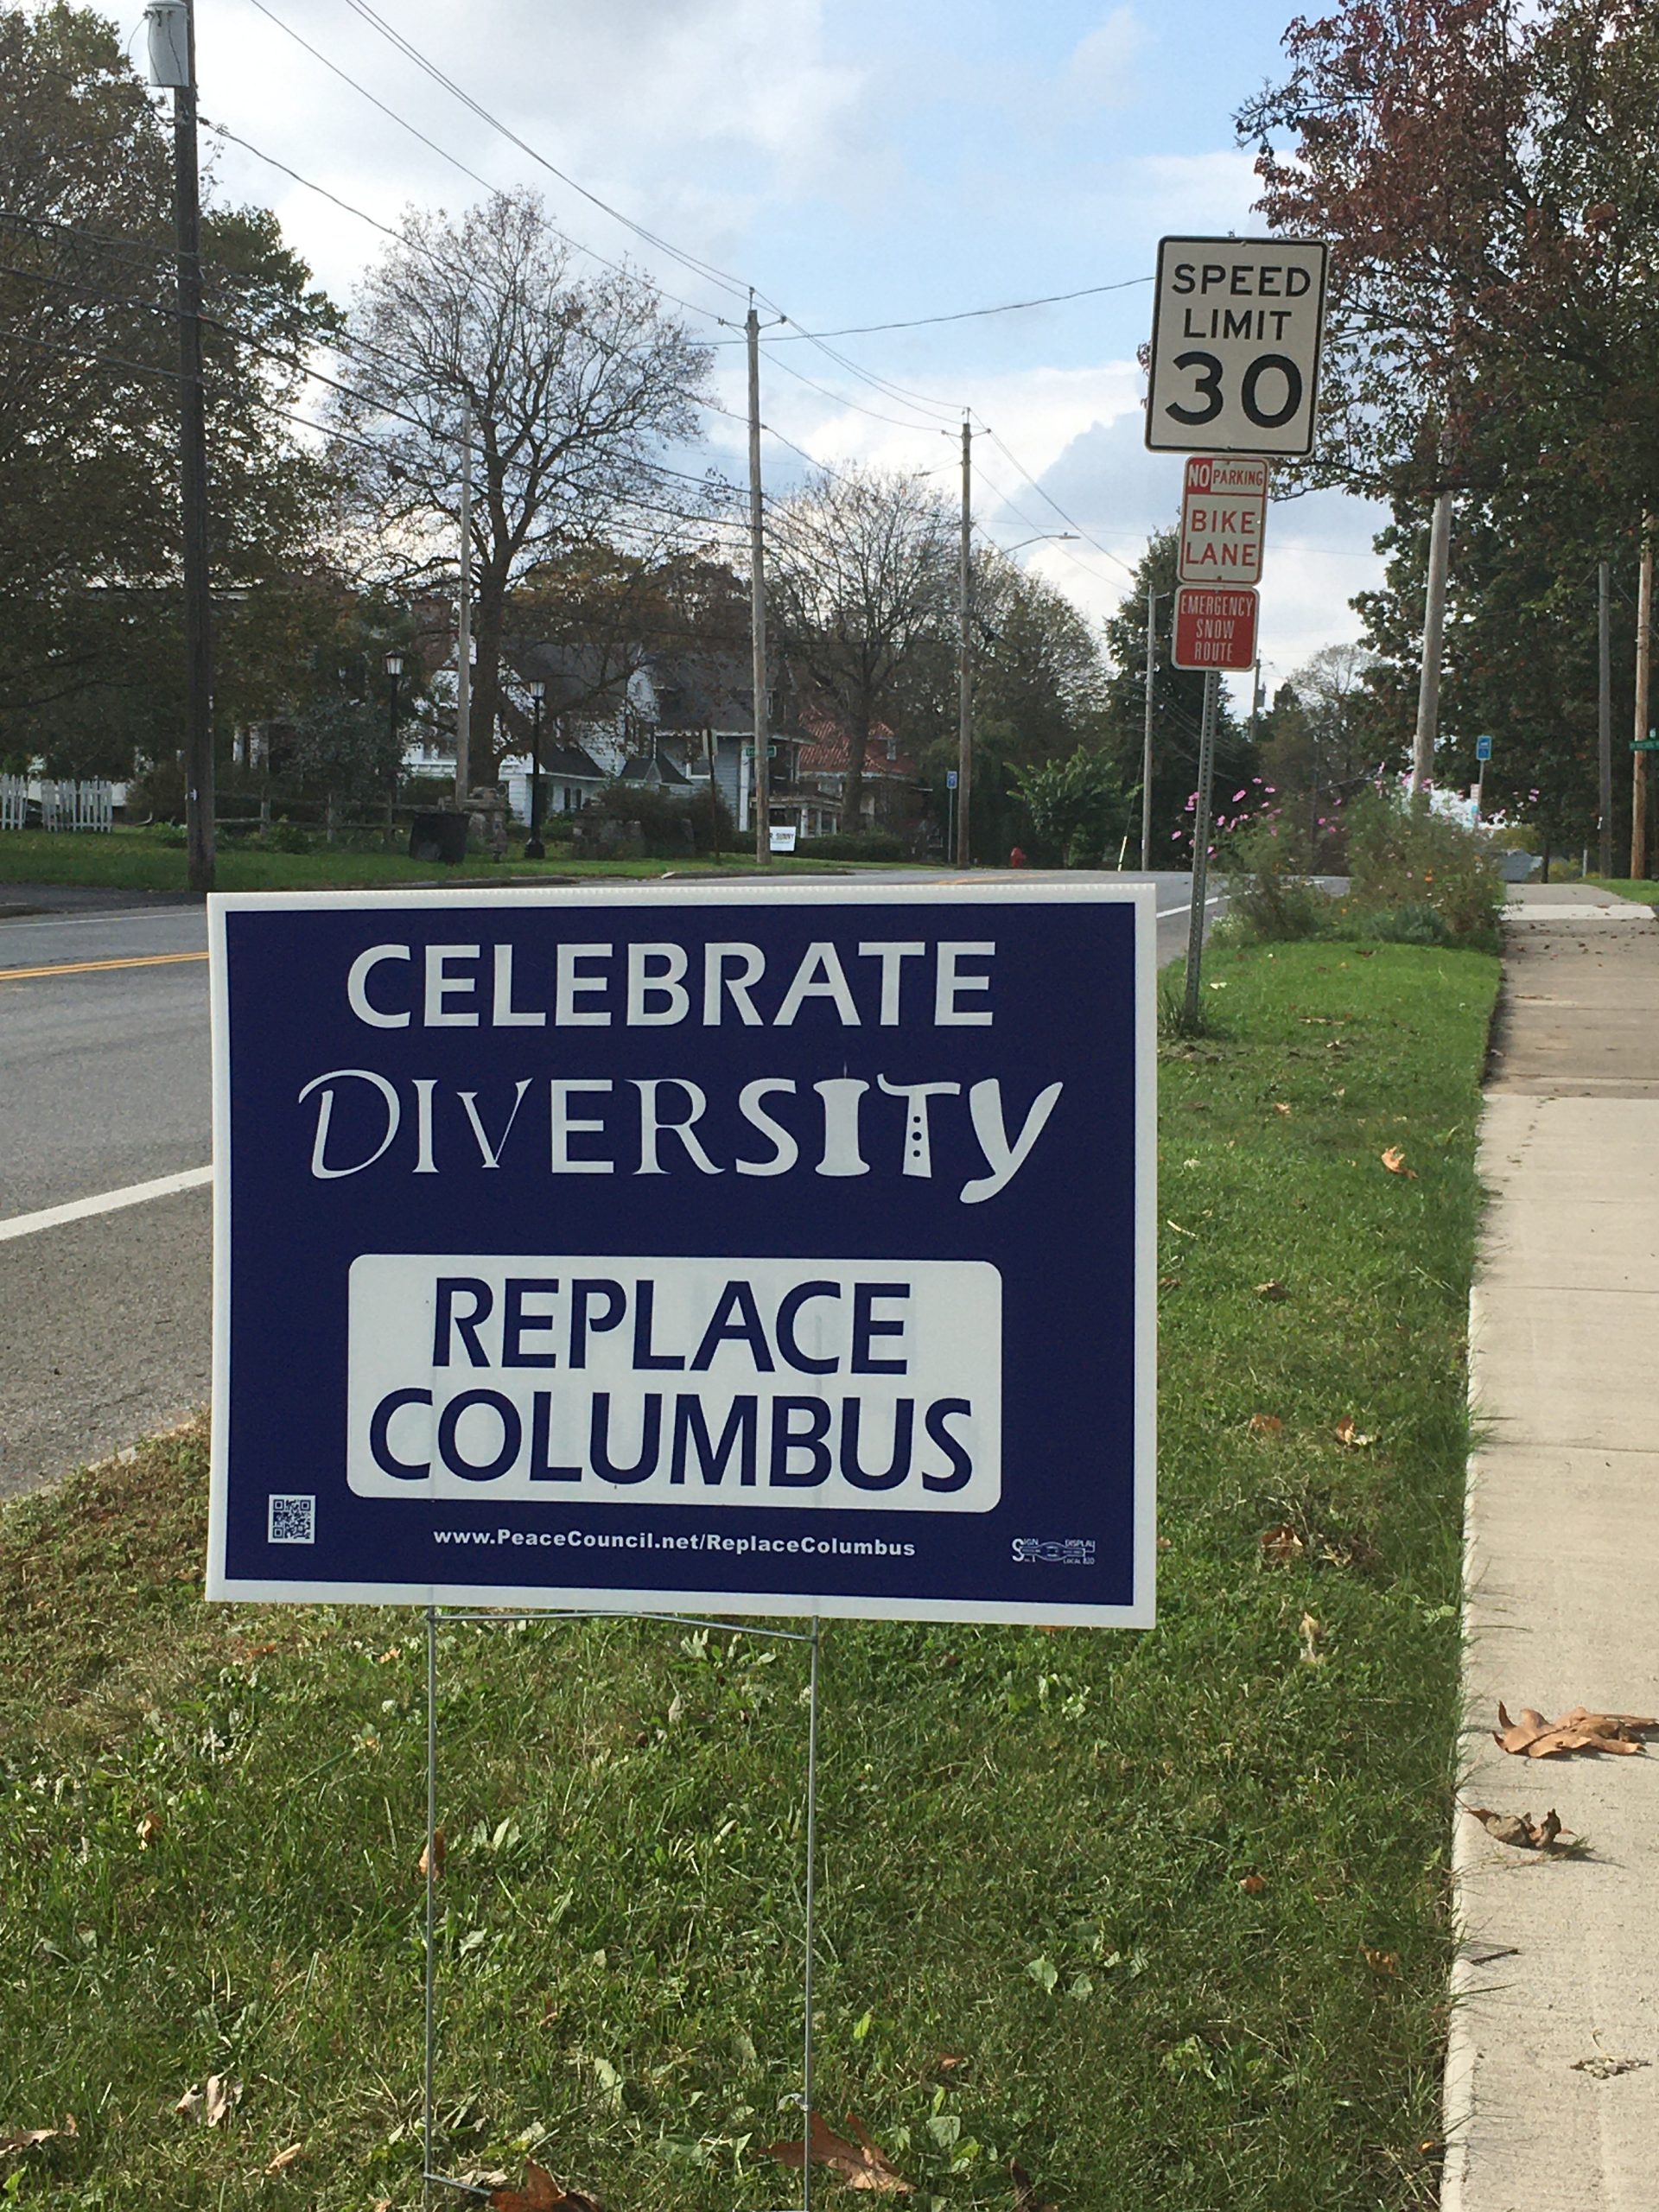 Lawn sign placed on the side of a road reading "CELEBRATE DIVERSITY / REPLACE COLUMBUS"